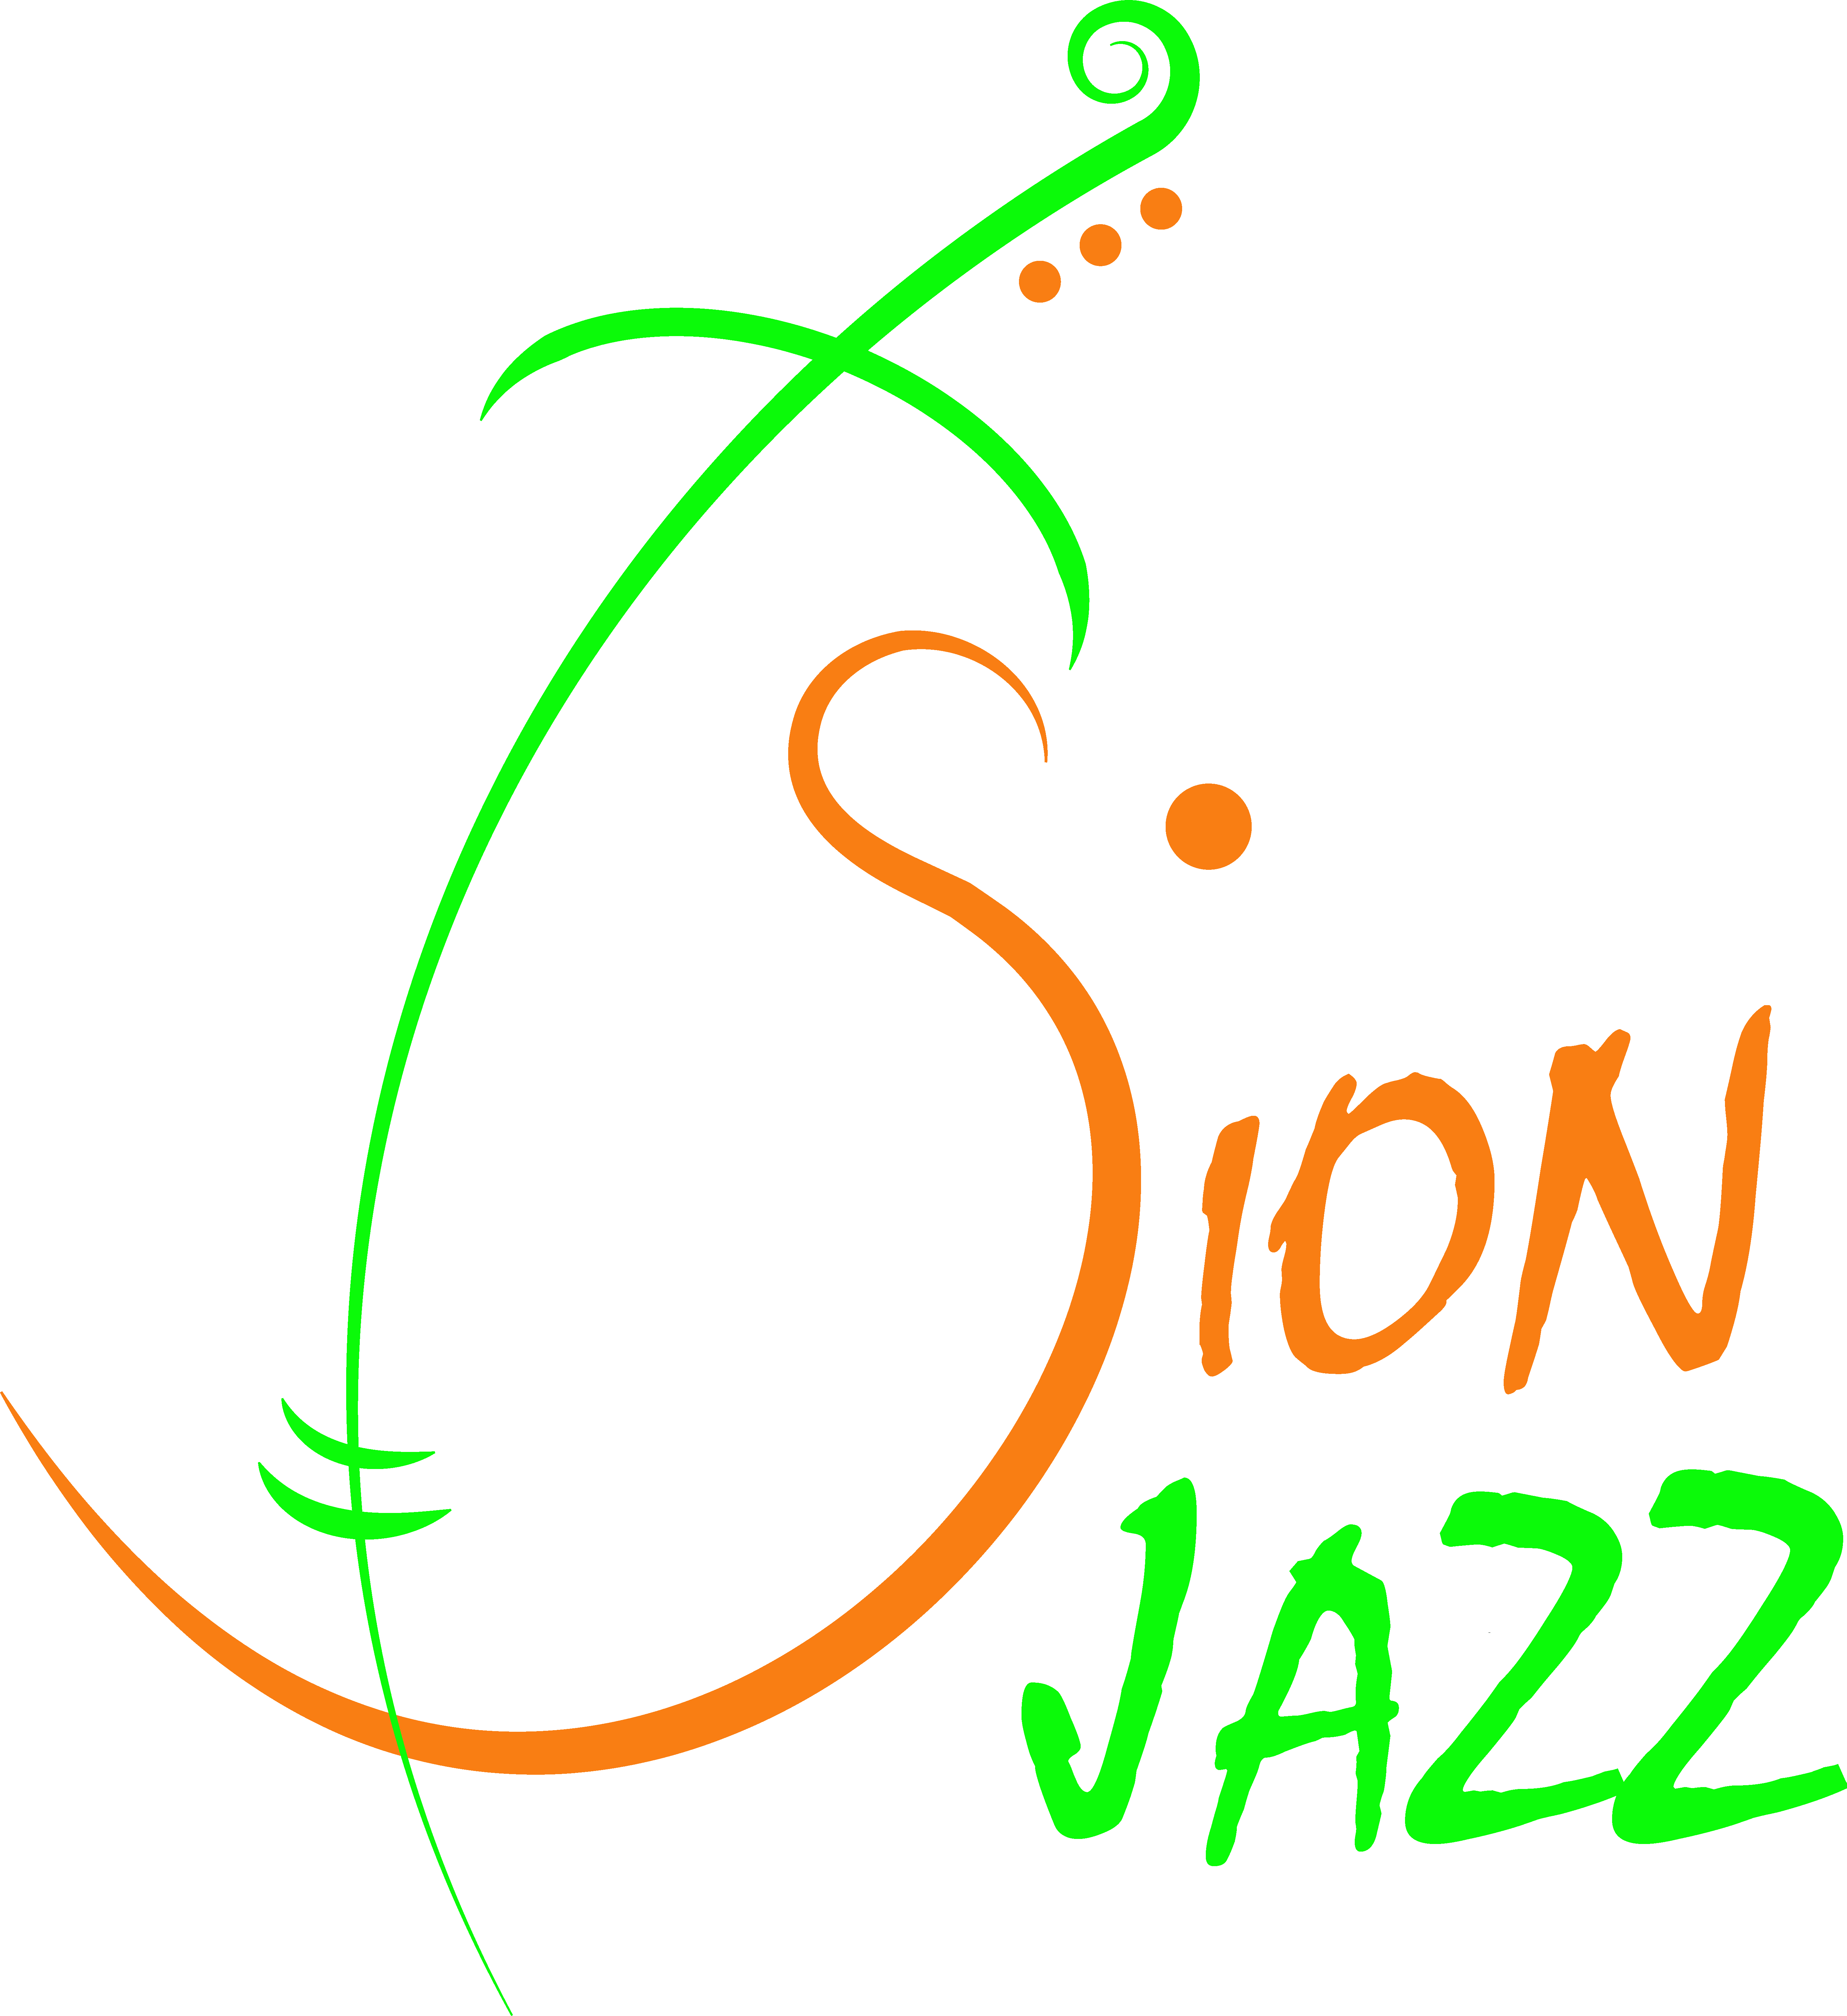 Sion Jazz